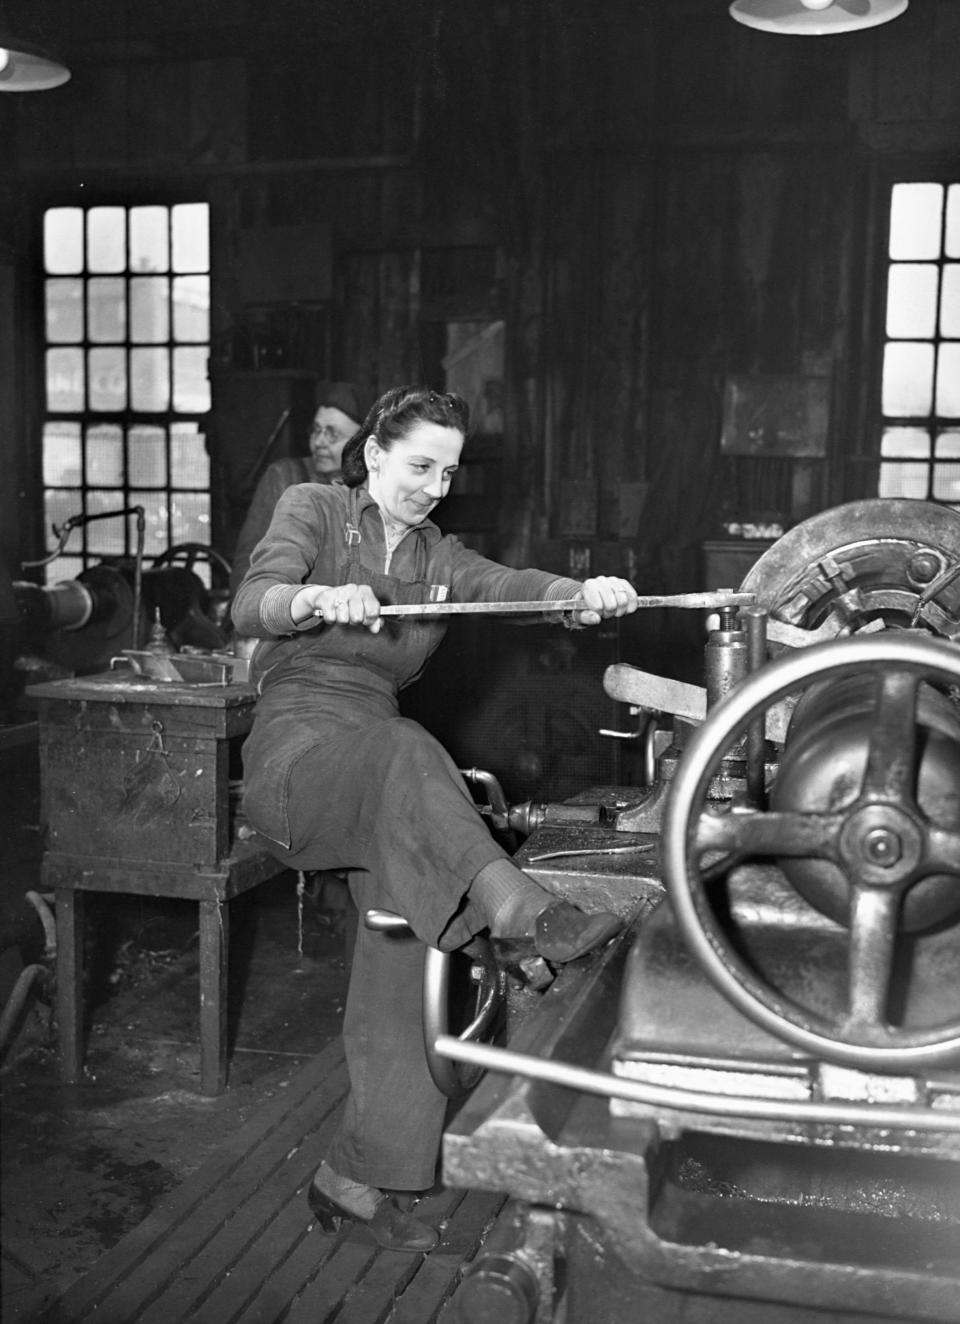 A woman braces with her foot to operate an axle lathe at a car wheel manufacturer in Buffalo, New York. The company began employing women for the war effort when its men went to fight. April, 1943.